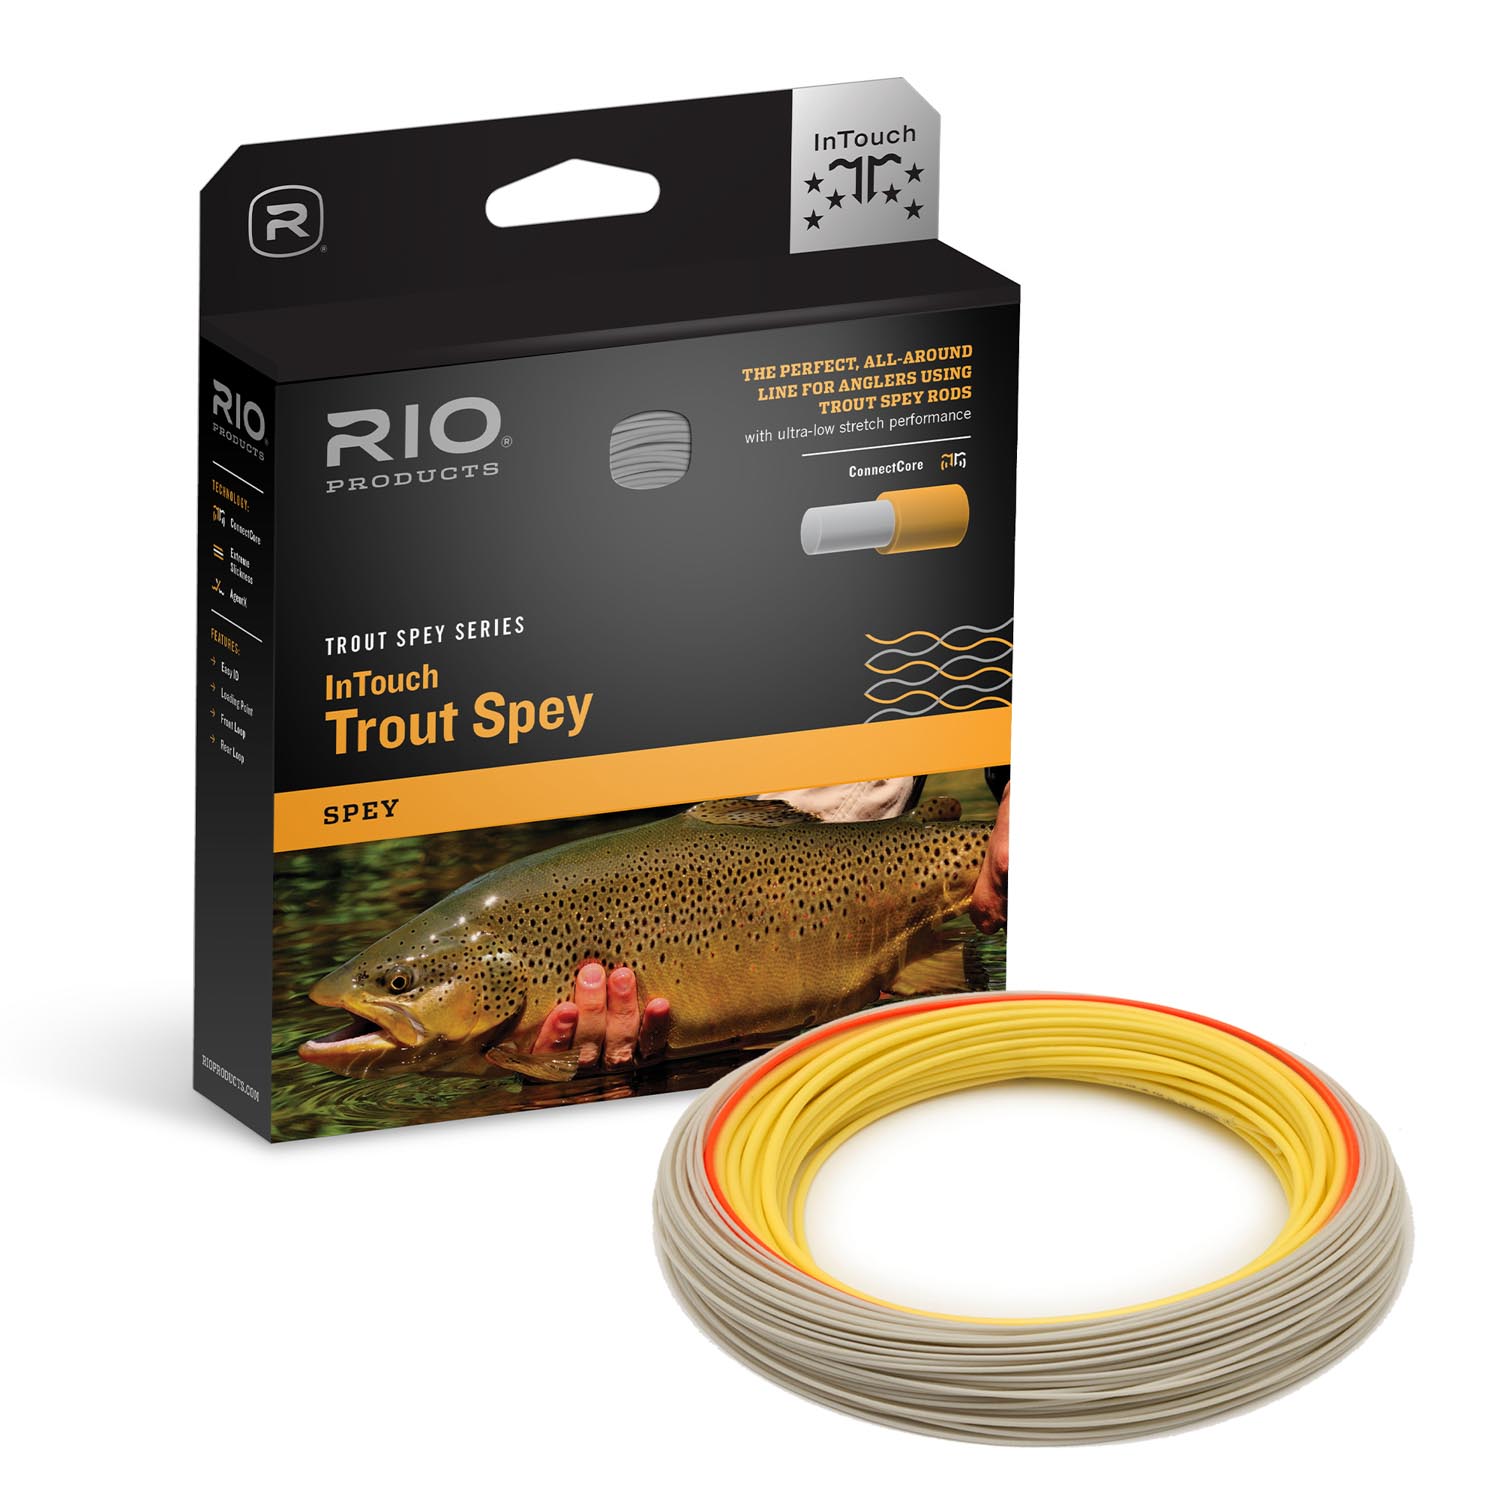 https://www.guideflyfishing.co.uk/wp-content/uploads/2020/04/InTouch-Trout-Spey-Box-Spool.jpg